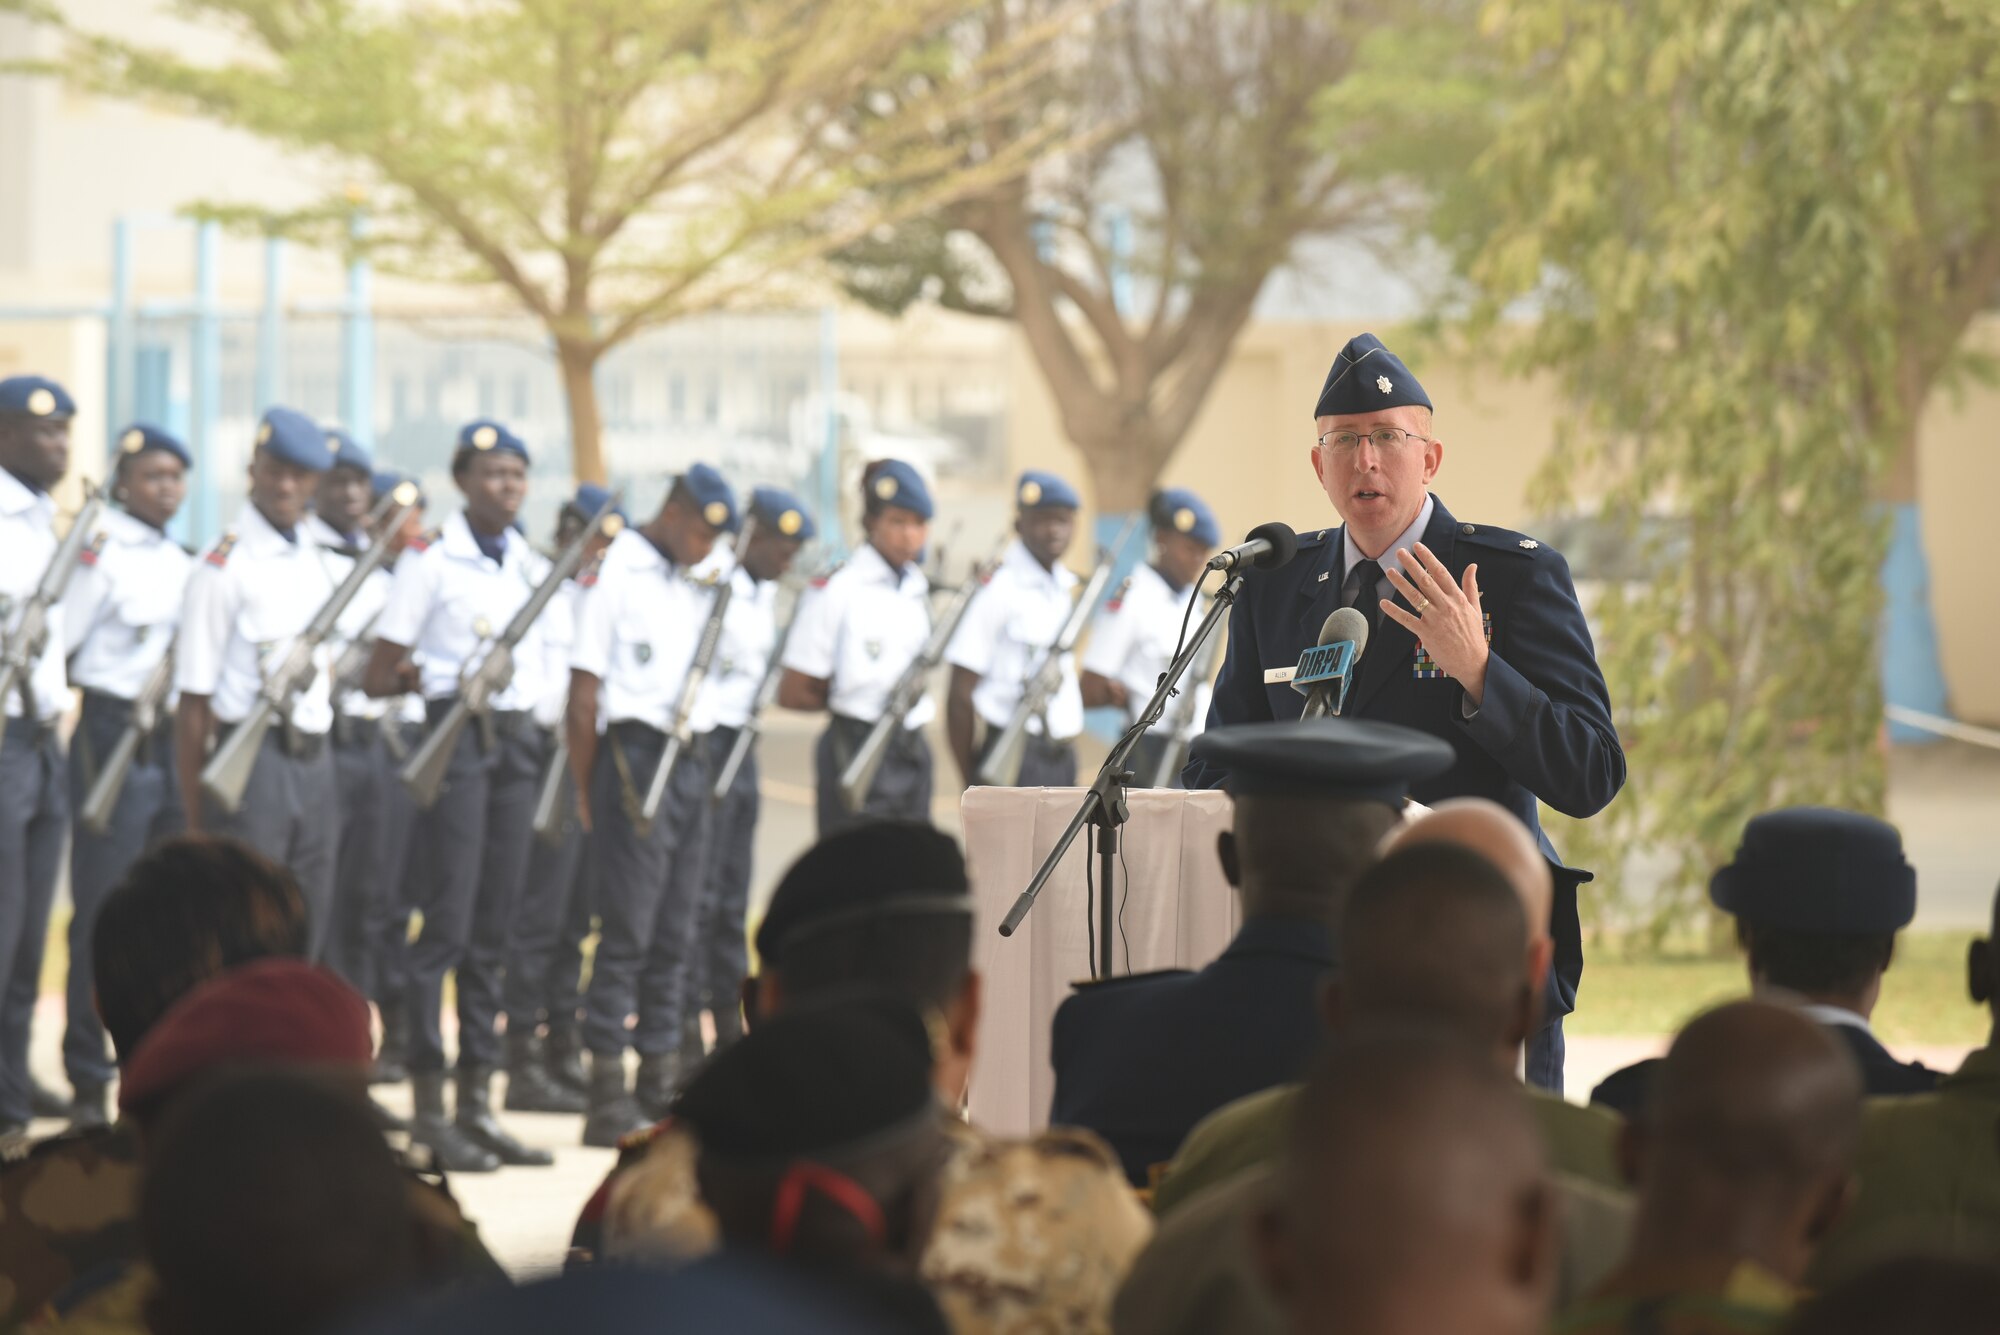 U.S. Air Force Lt. Col. Andrew Allen, chief of global health engagements branch, U.S. Air Forces in Europe and Air Forces Africa, speaks during the closing ceremony of African Partnership Flight Senegal at Captain Andalla Cissé Air Base, Senegal, March 23, 2018. The purpose of APF Senegal is to conduct multilateral, military-to-military engagements and security assistance with African air forces. (U.S. Air Force photo by Airman 1st Class Eli Chevalier)